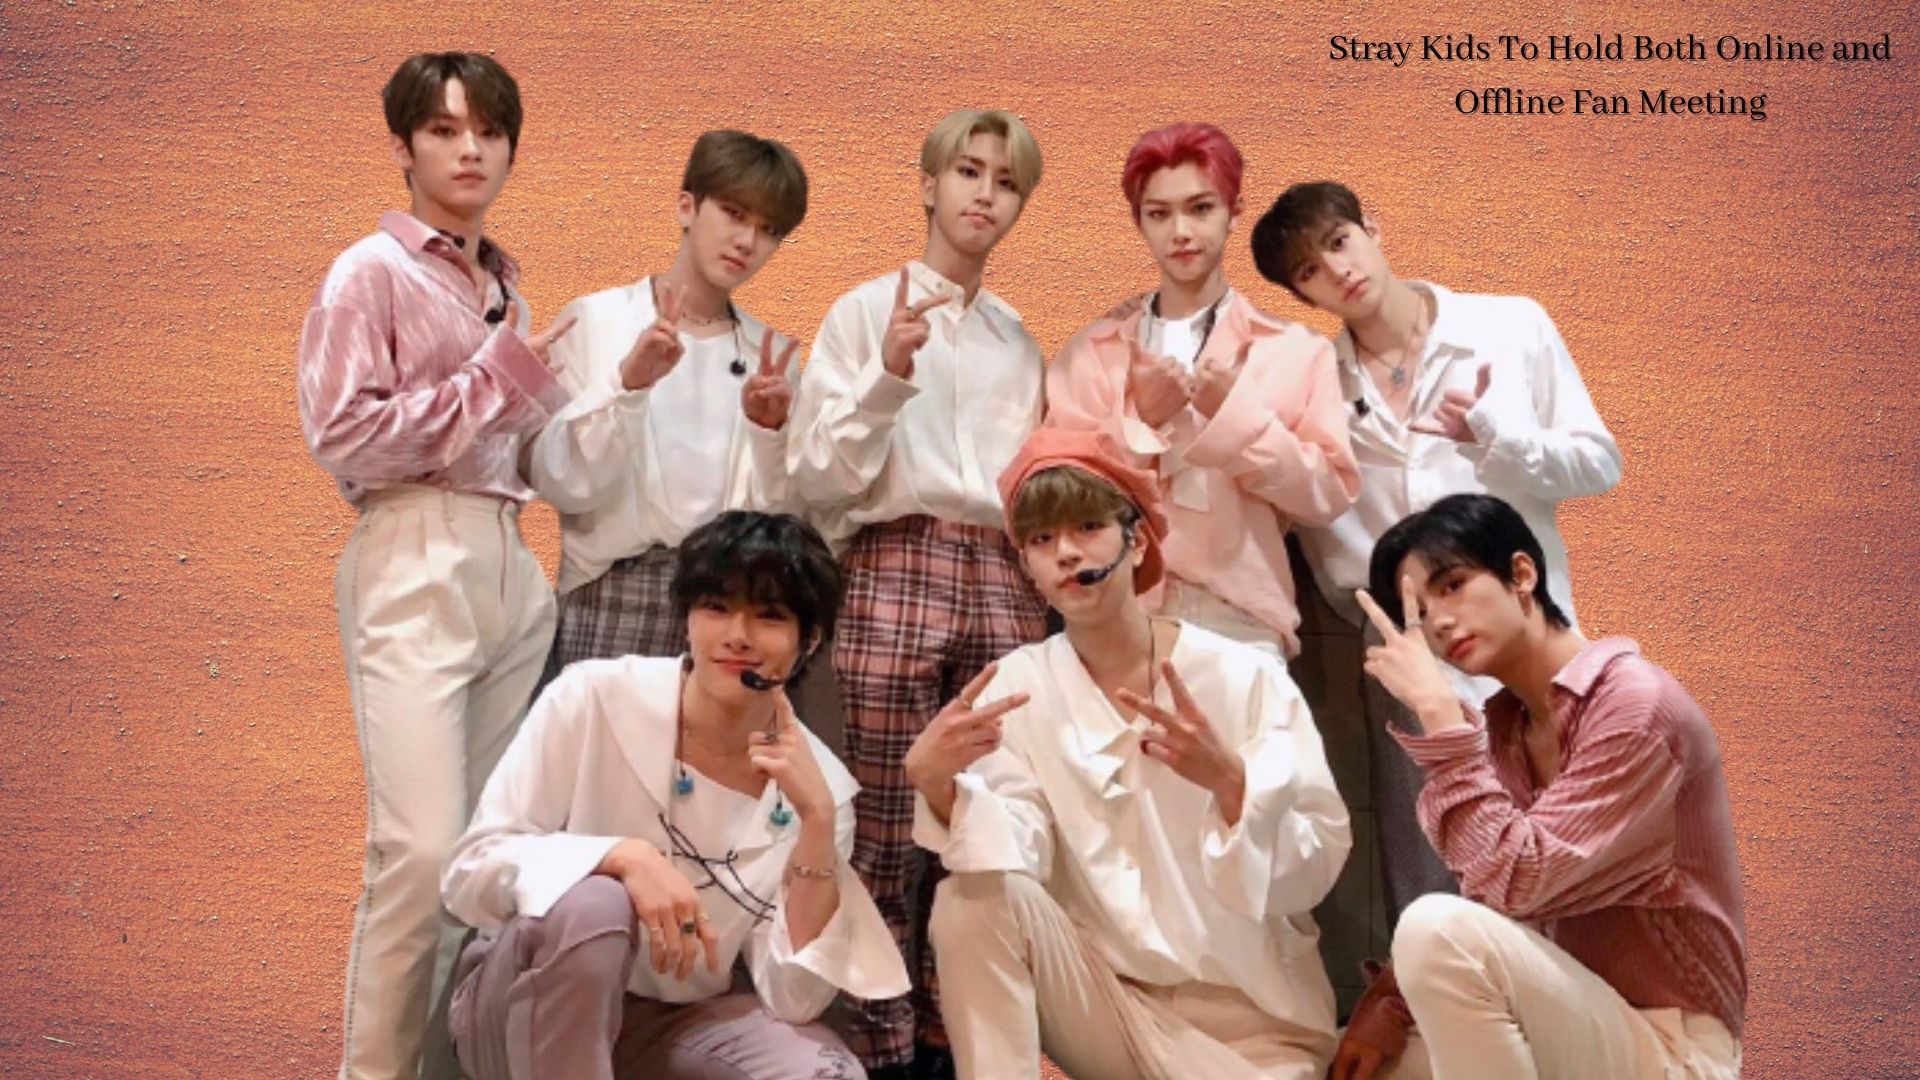 Stray Kids Prepares to Hold Fan Meeting in Both Online as Well as Offline Mode